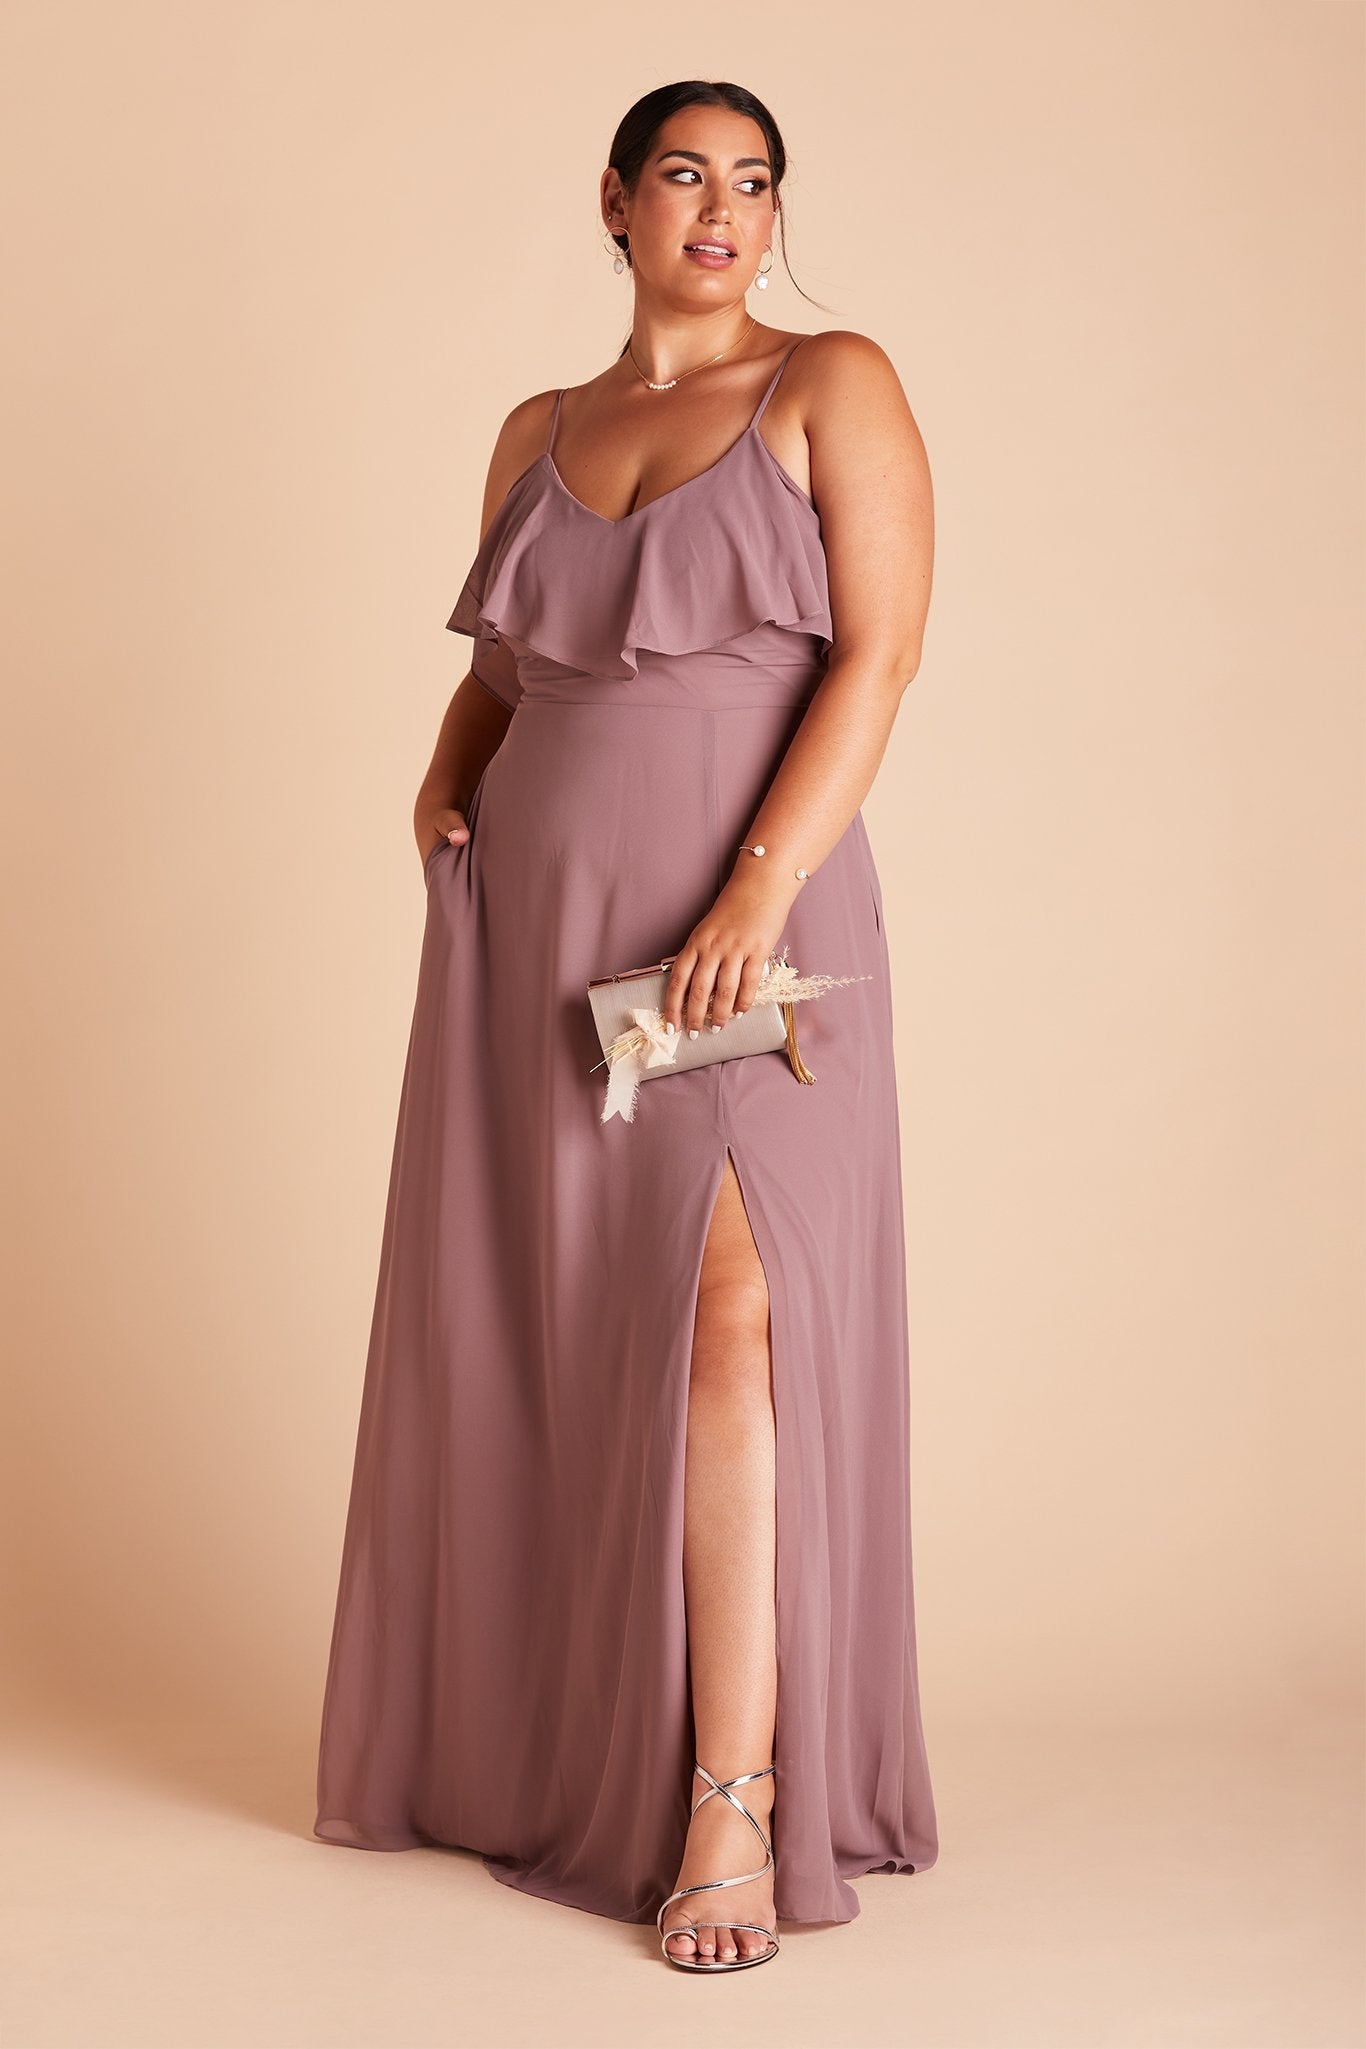 Jane convertible plus size bridesmaid dress with slit in dark mauve chiffon by Birdy Grey, front view